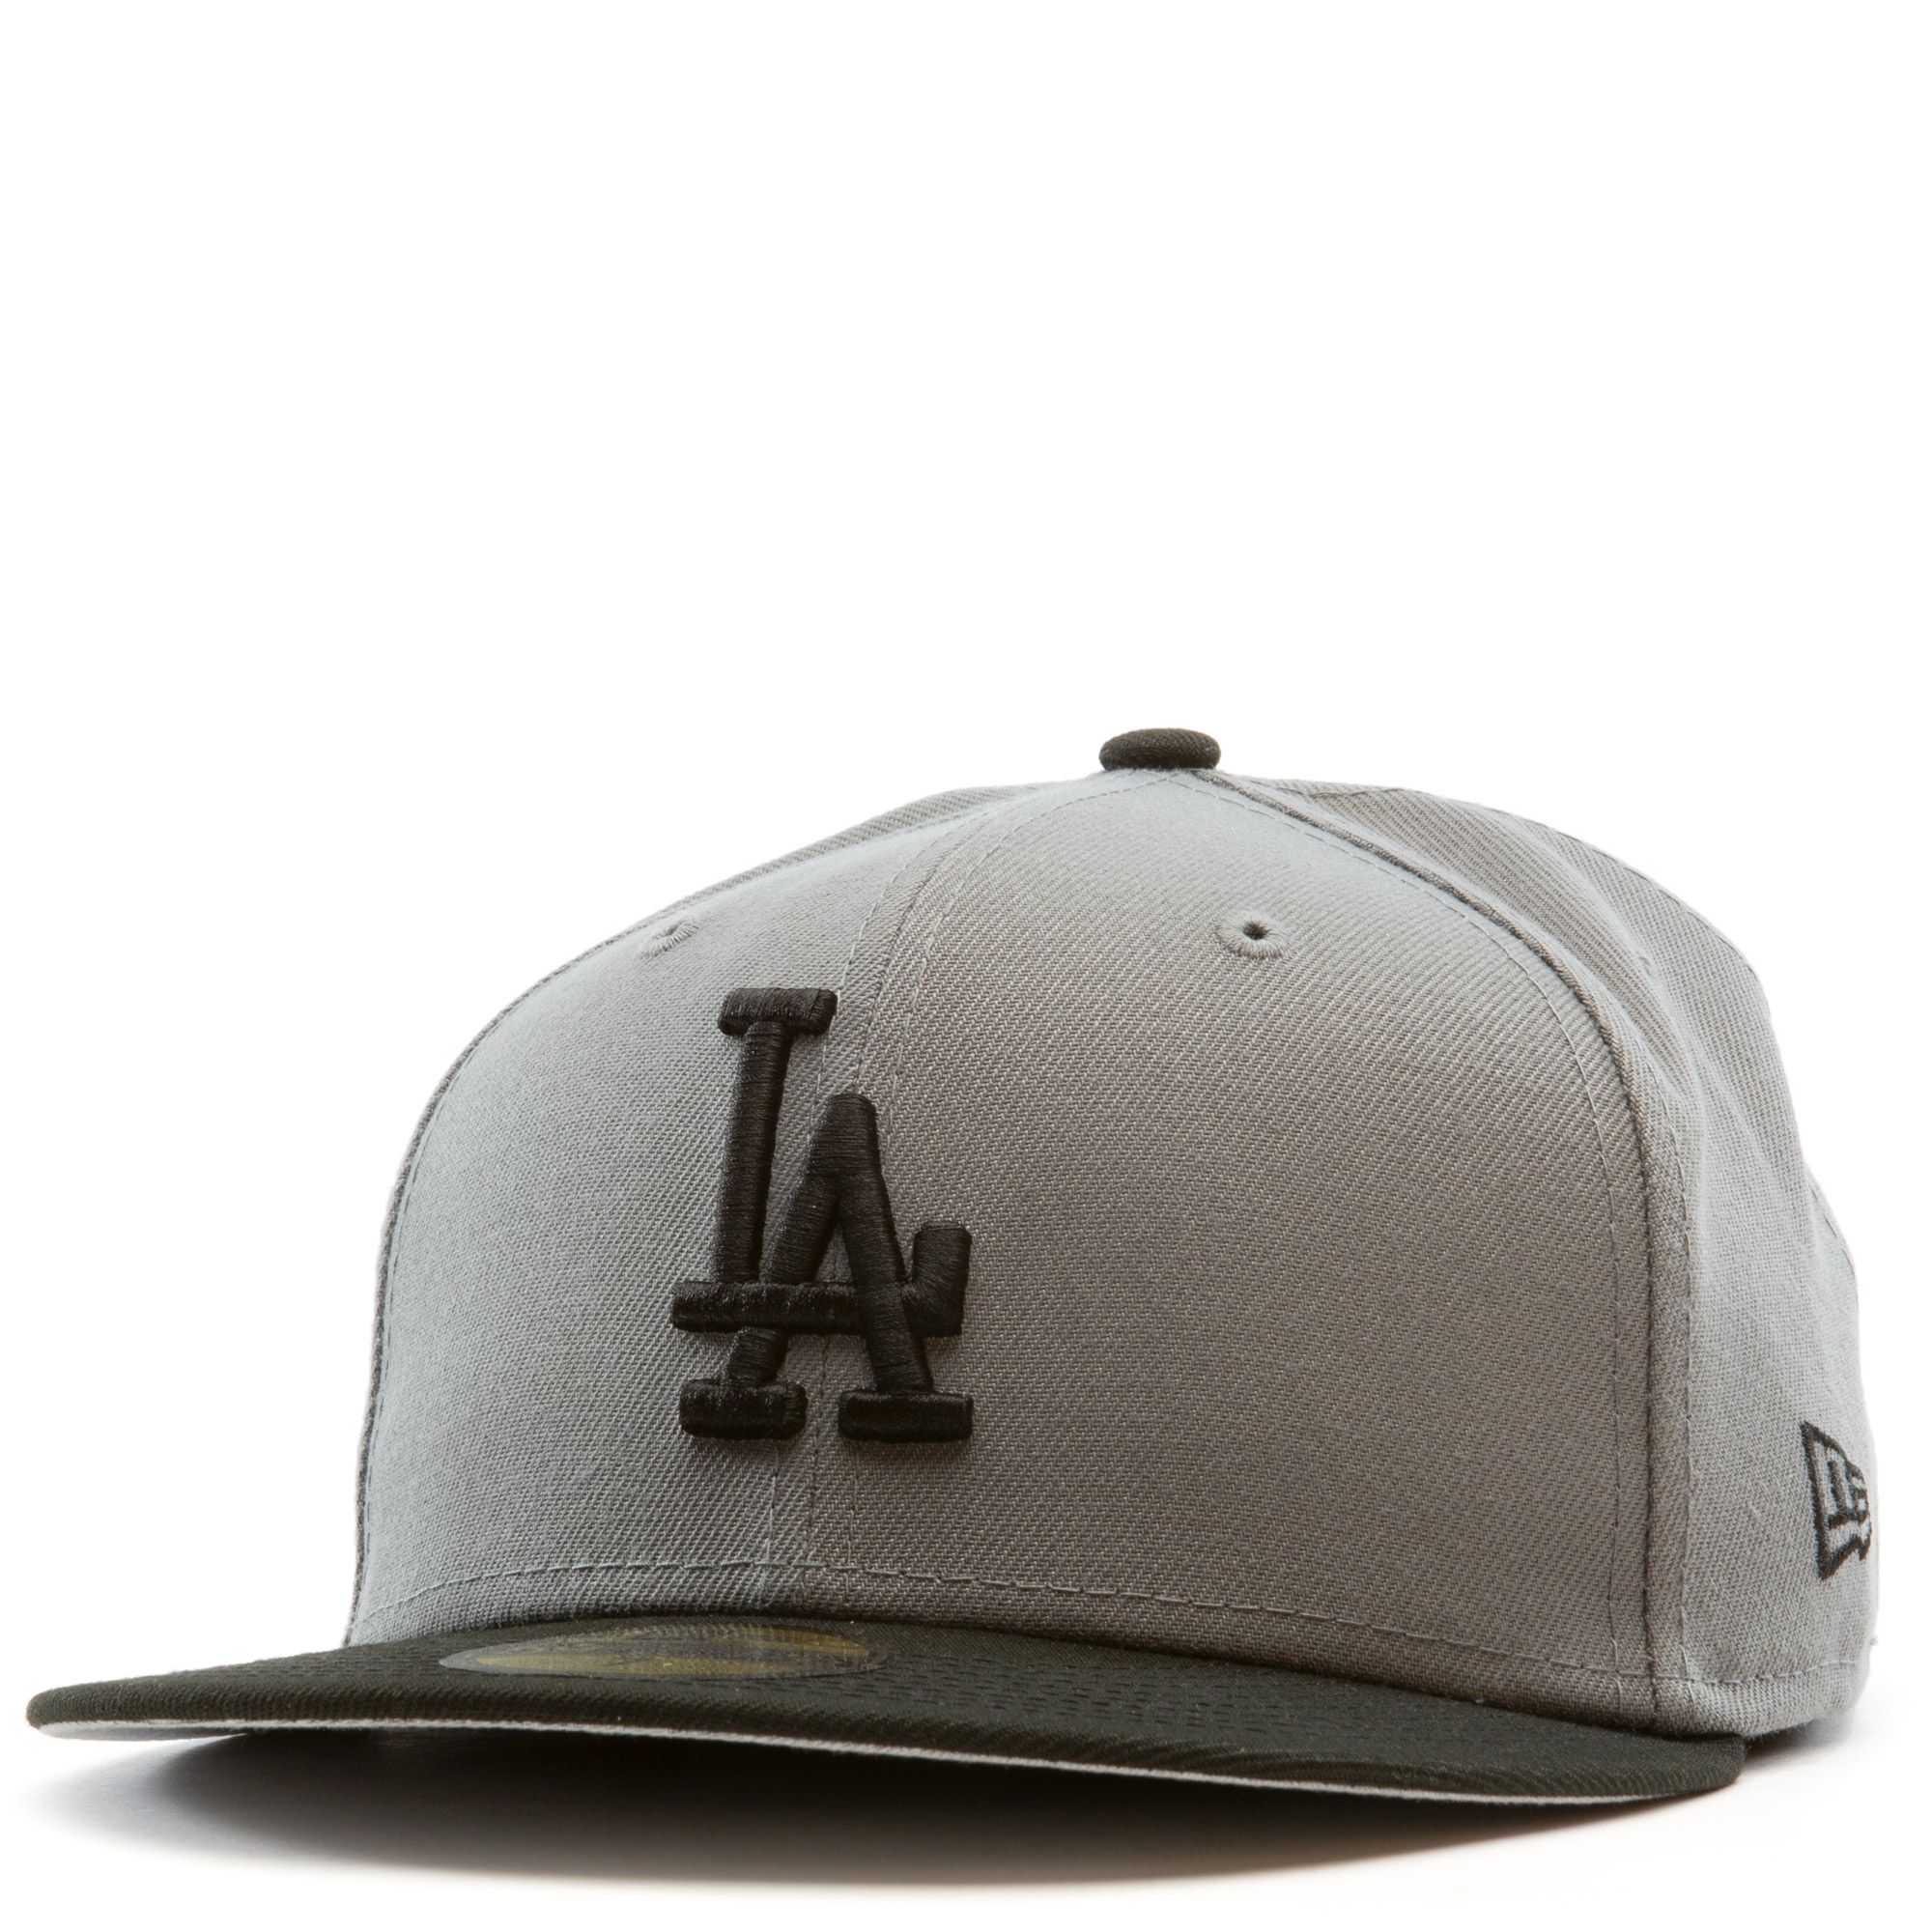 New Era 59Fifty Cap Los Angeles Dodgers Black White LA Back Logo Fitted 5950 Hat